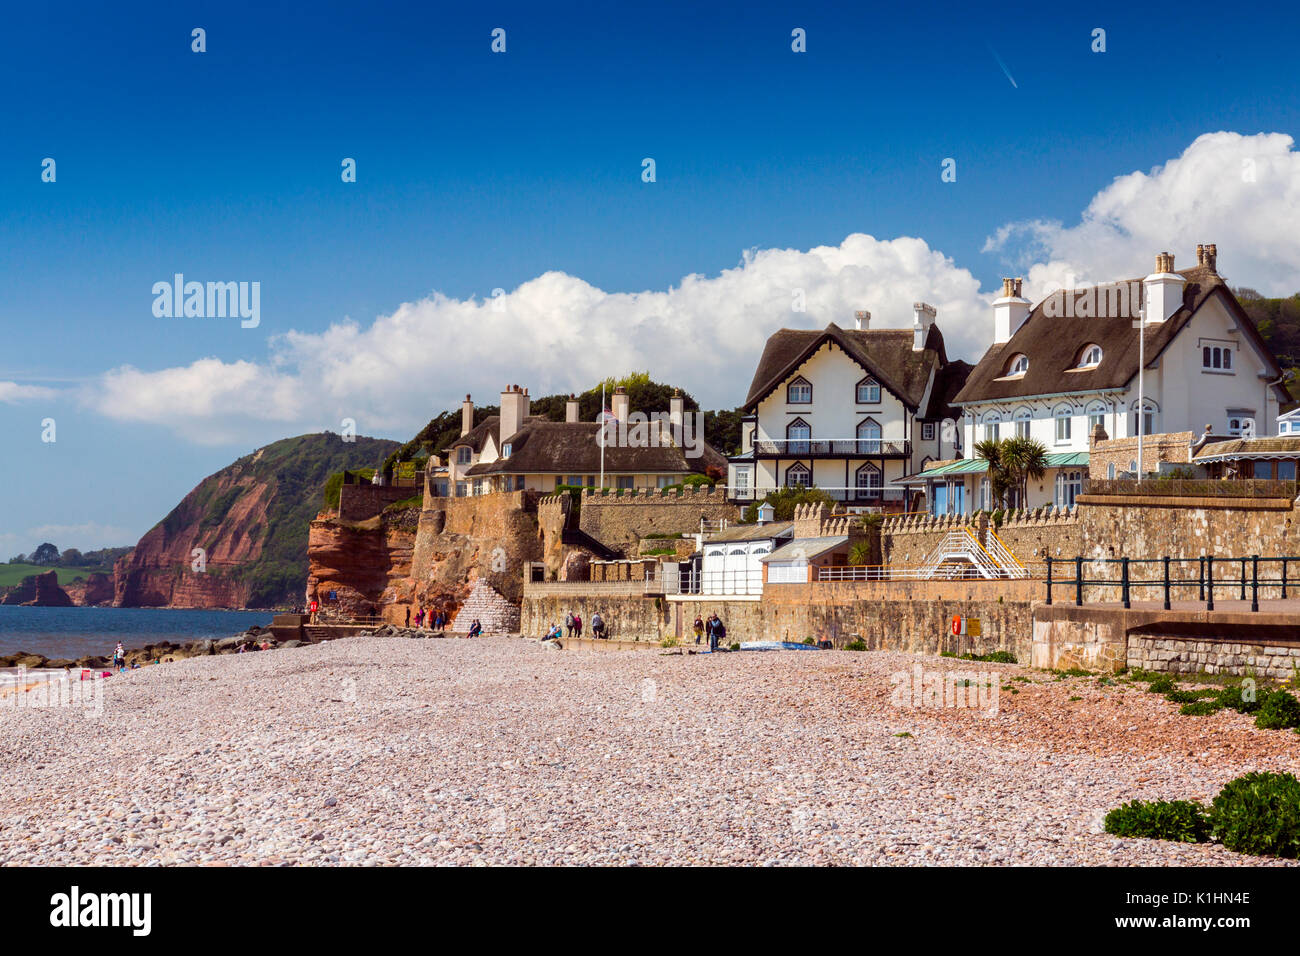 Sidmouth is a popular Victorian seaside resort on the Jurassic Coast with thatched houses and towering red sandstone cliffs, Devon, England, UK Stock Photo